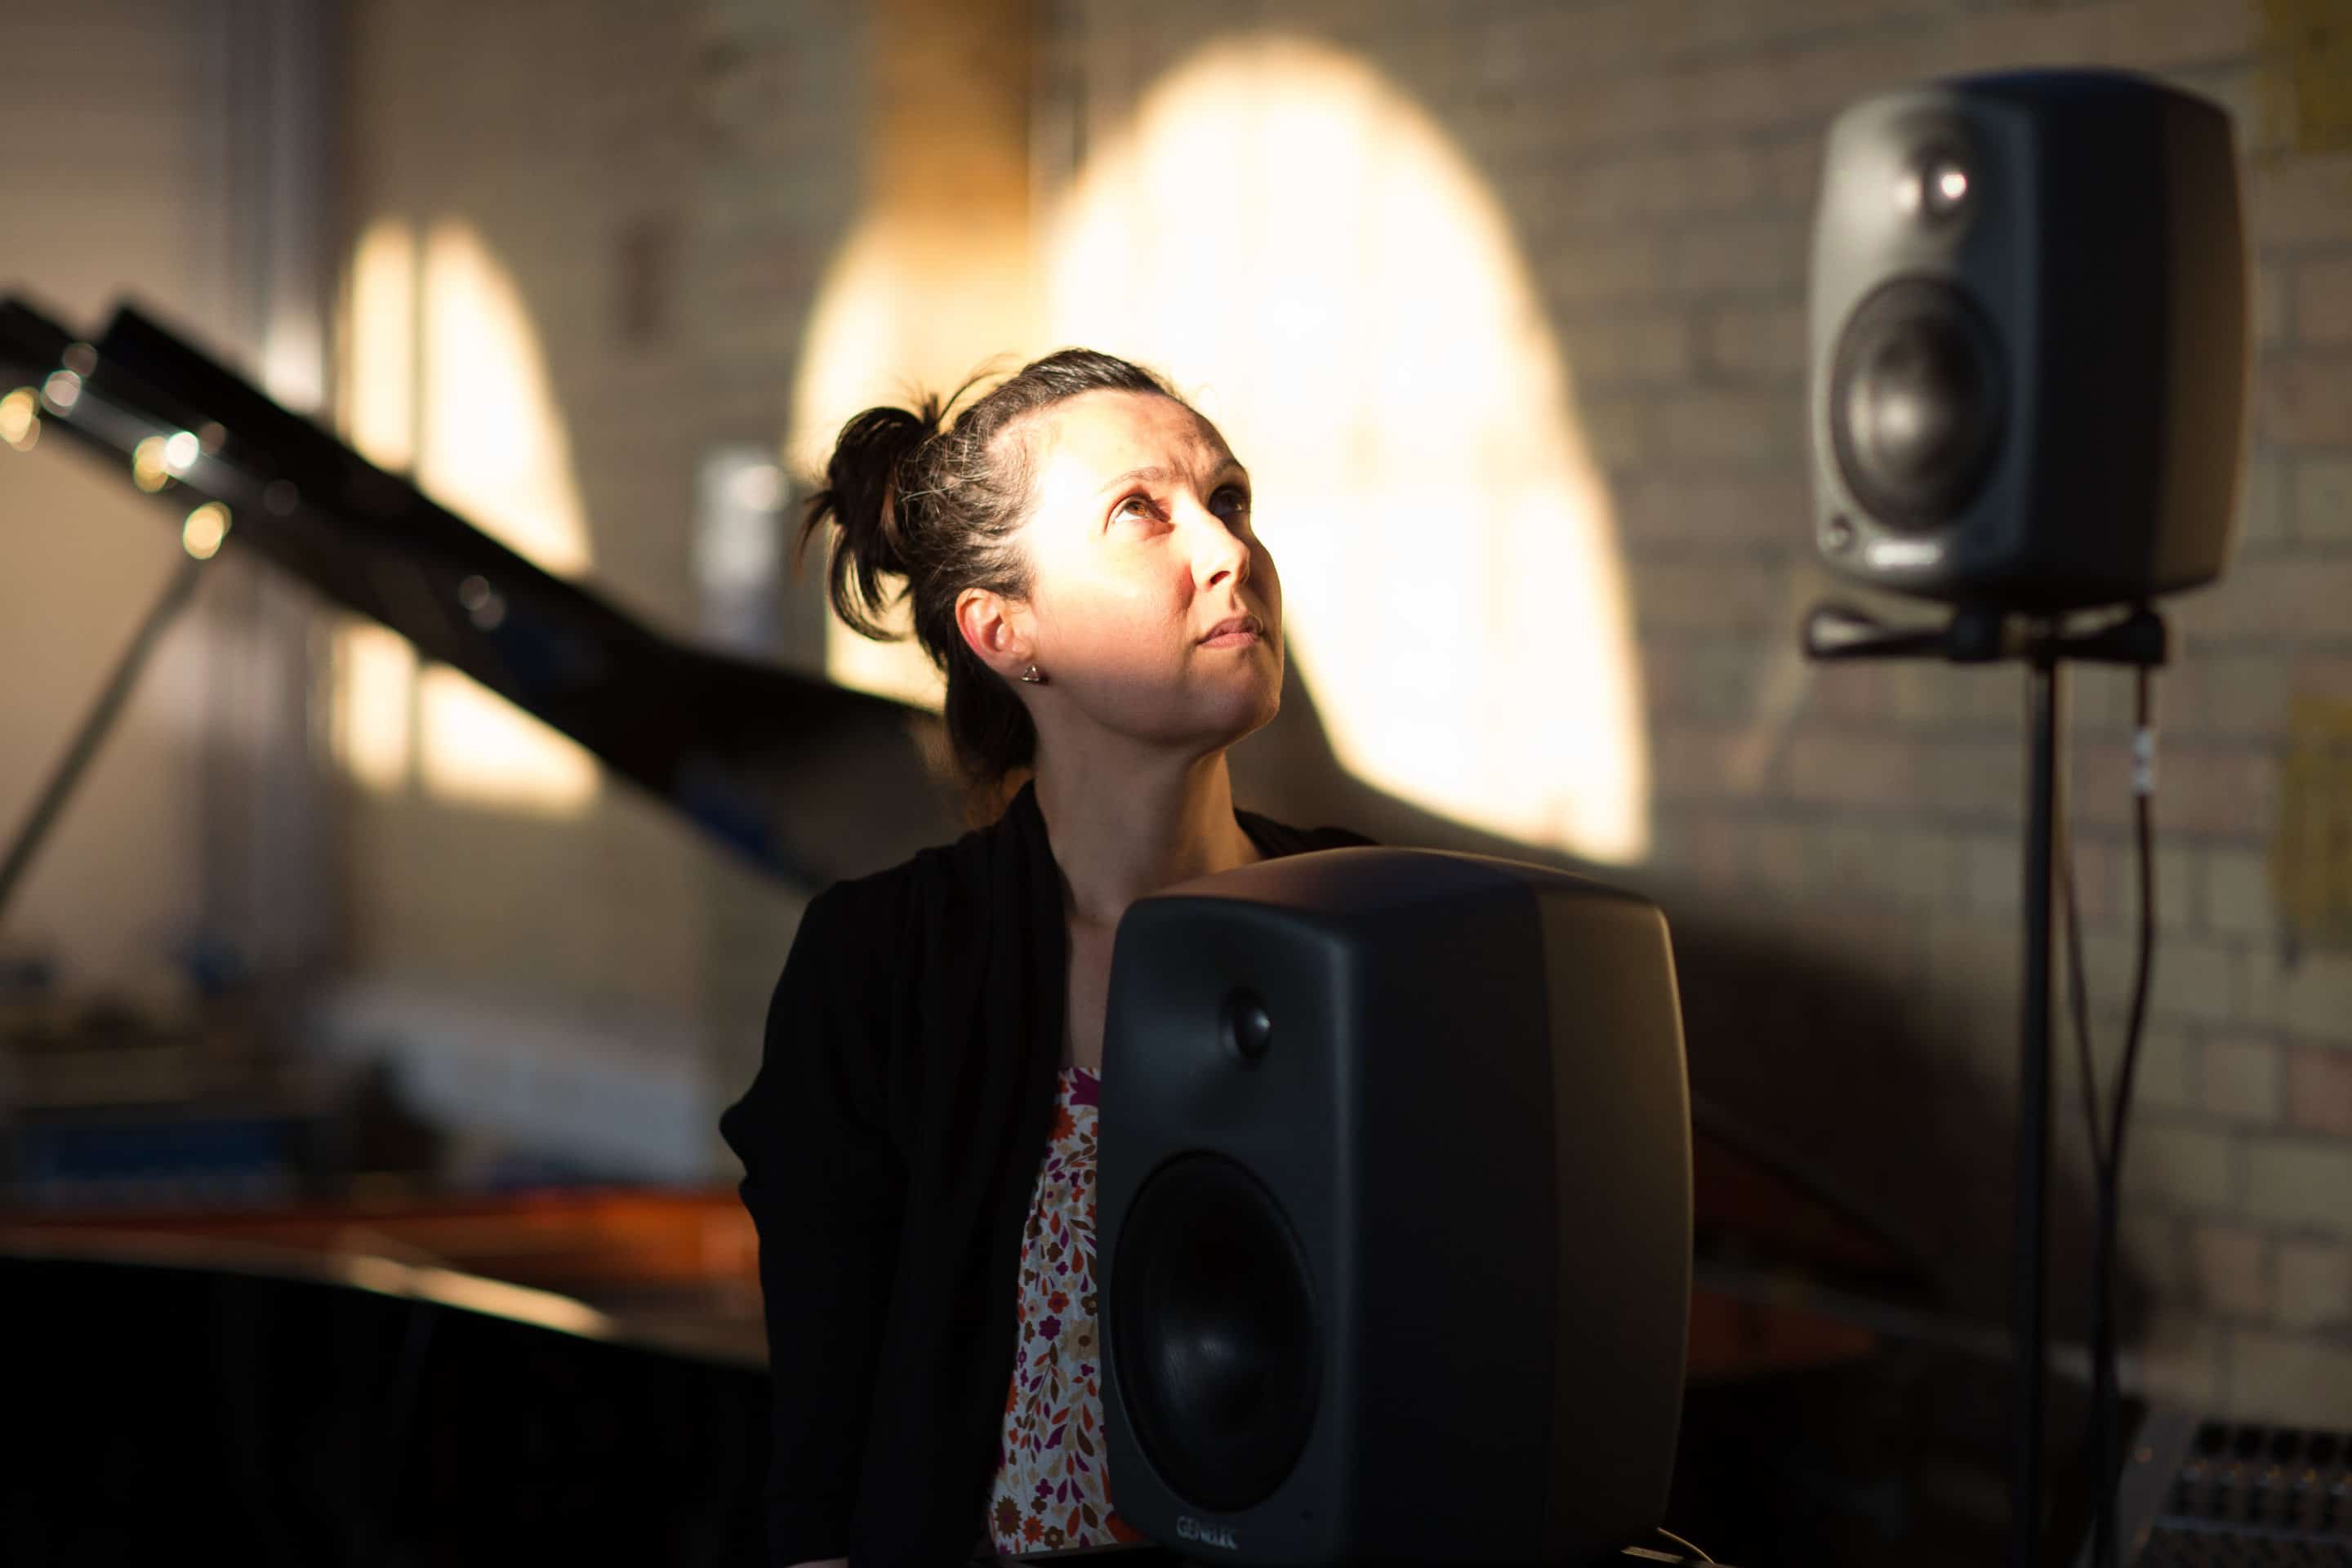 Kate Halsall with Galvanize and Fretwork Ensembles: The Open Fund for Music Creators